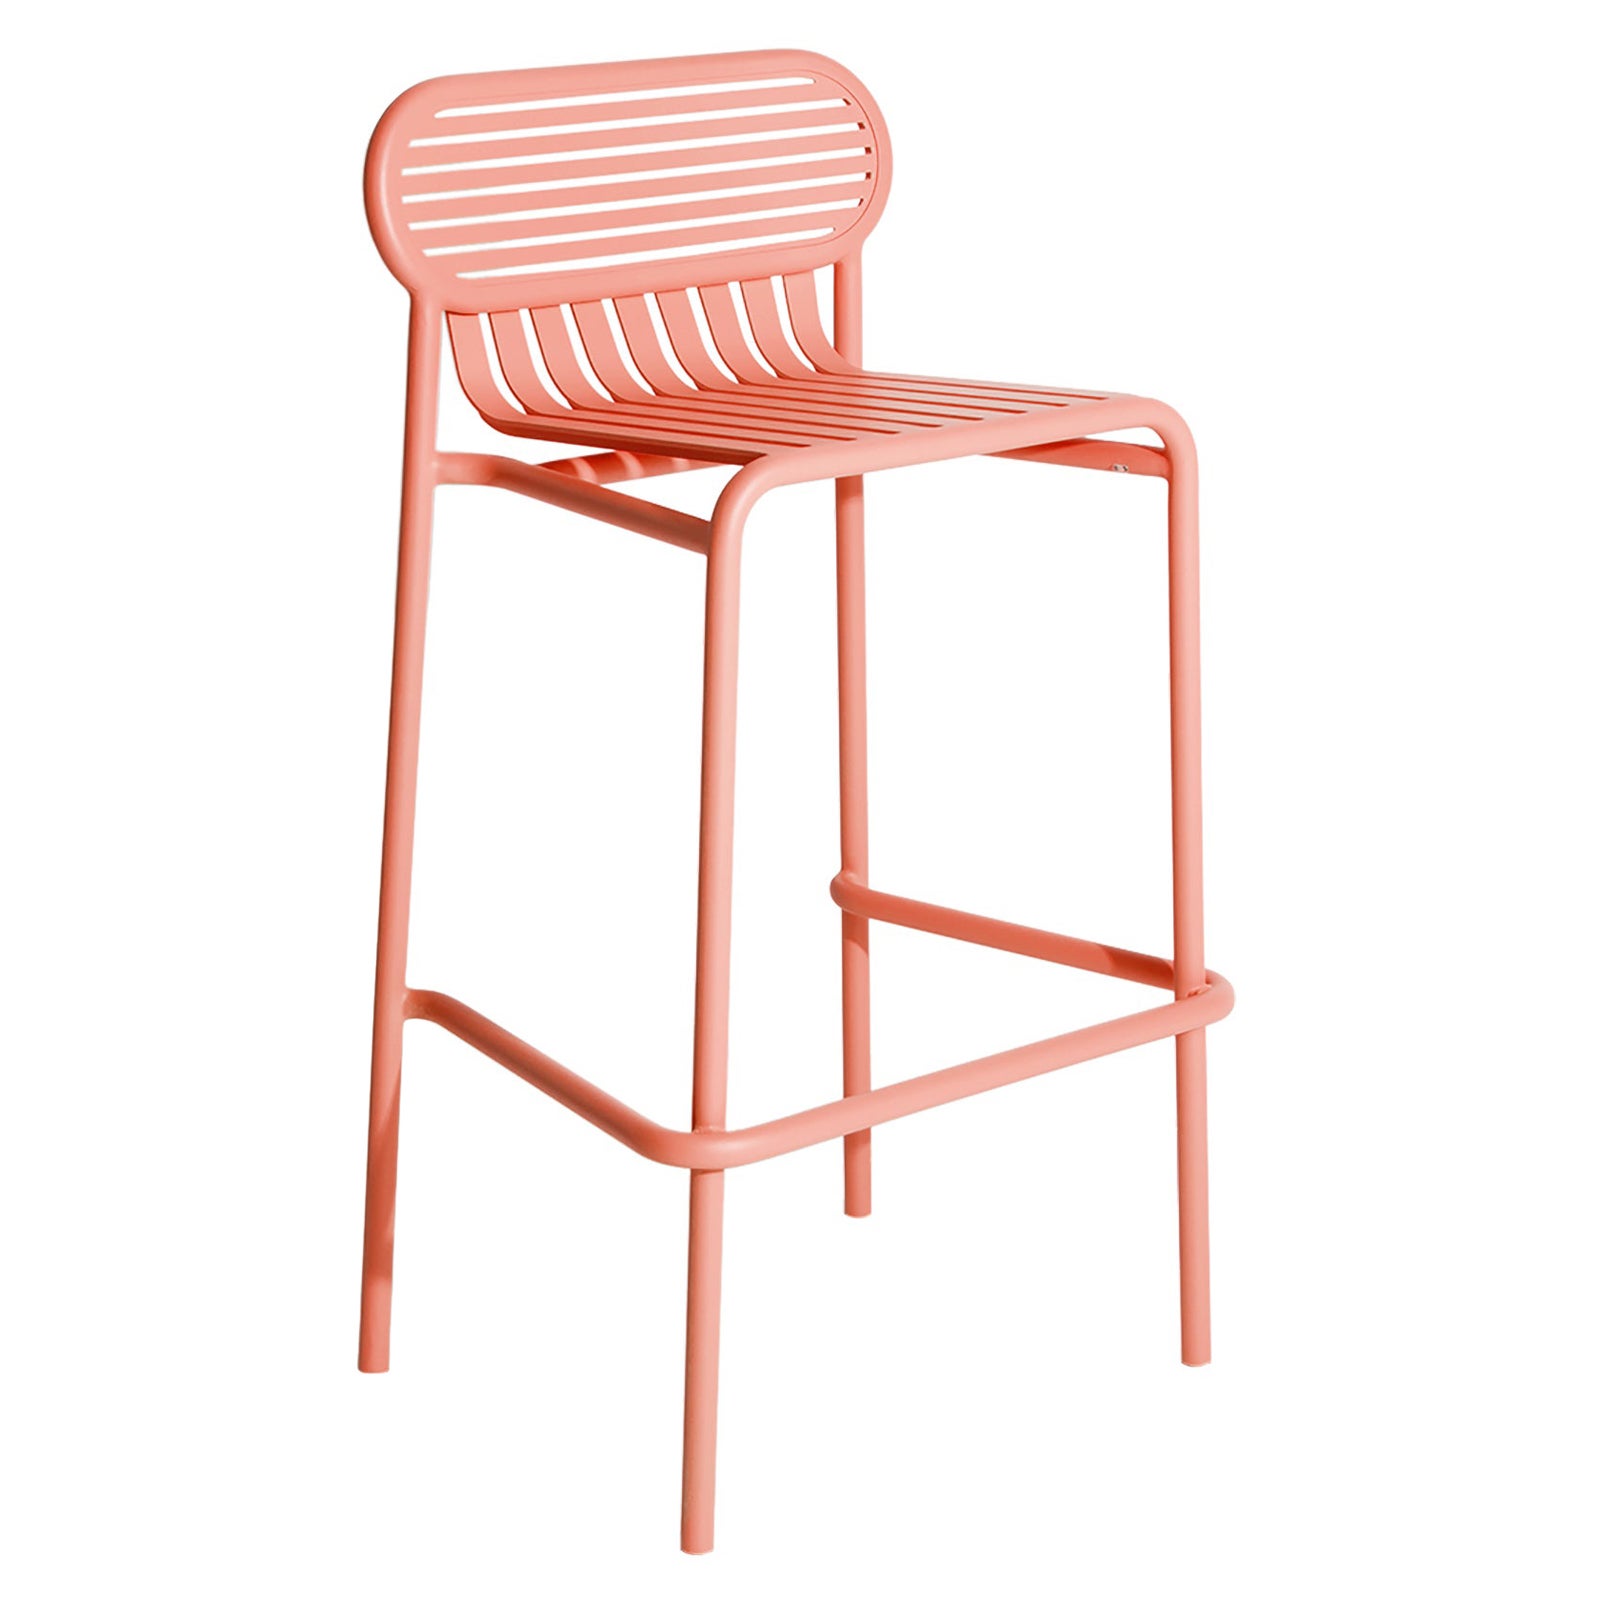 Petite Friture Week-End Bar Stool in Coral Aluminium by Studio BrichetZiegler For Sale